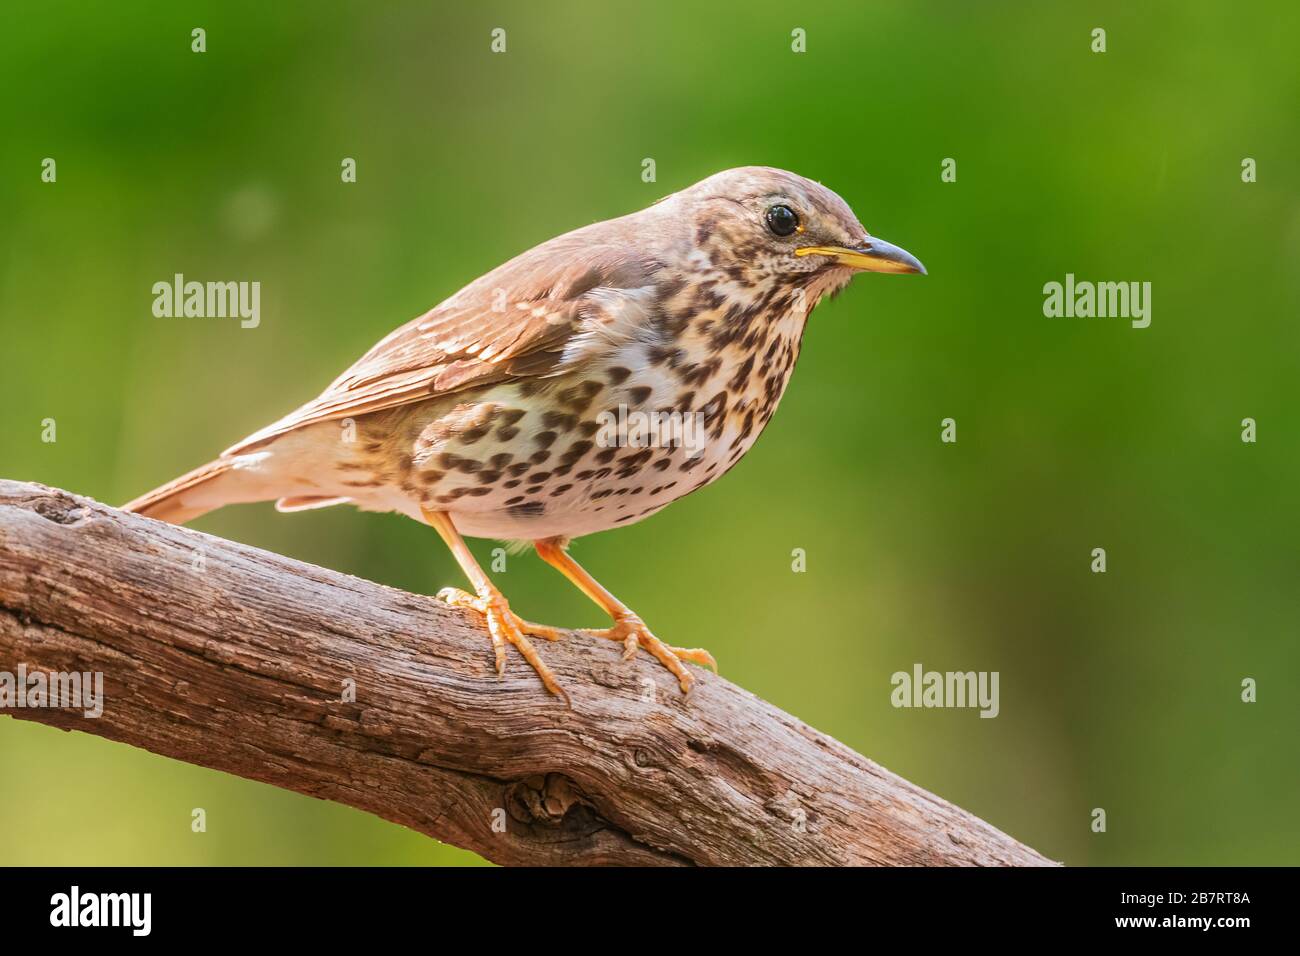 Song Thrush - Turdus philomelos, inconspicuous song bird from European forests and woodlands, Hortobagy, Hungary. Stock Photo